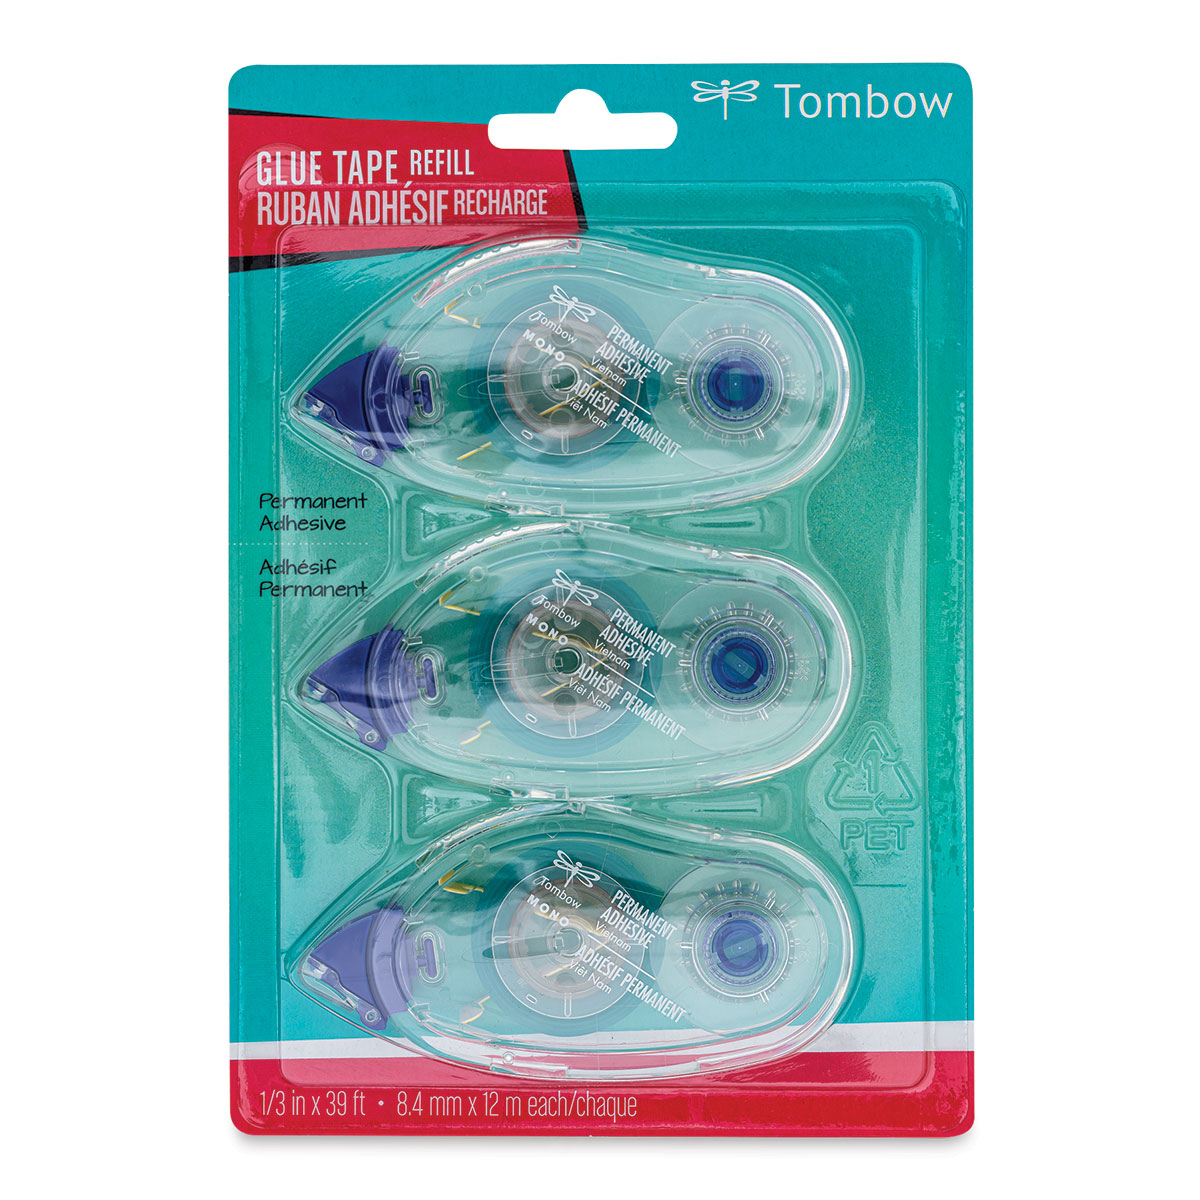 Tombow Mono Permanent Adhesive Applicator, 1/3, Clear